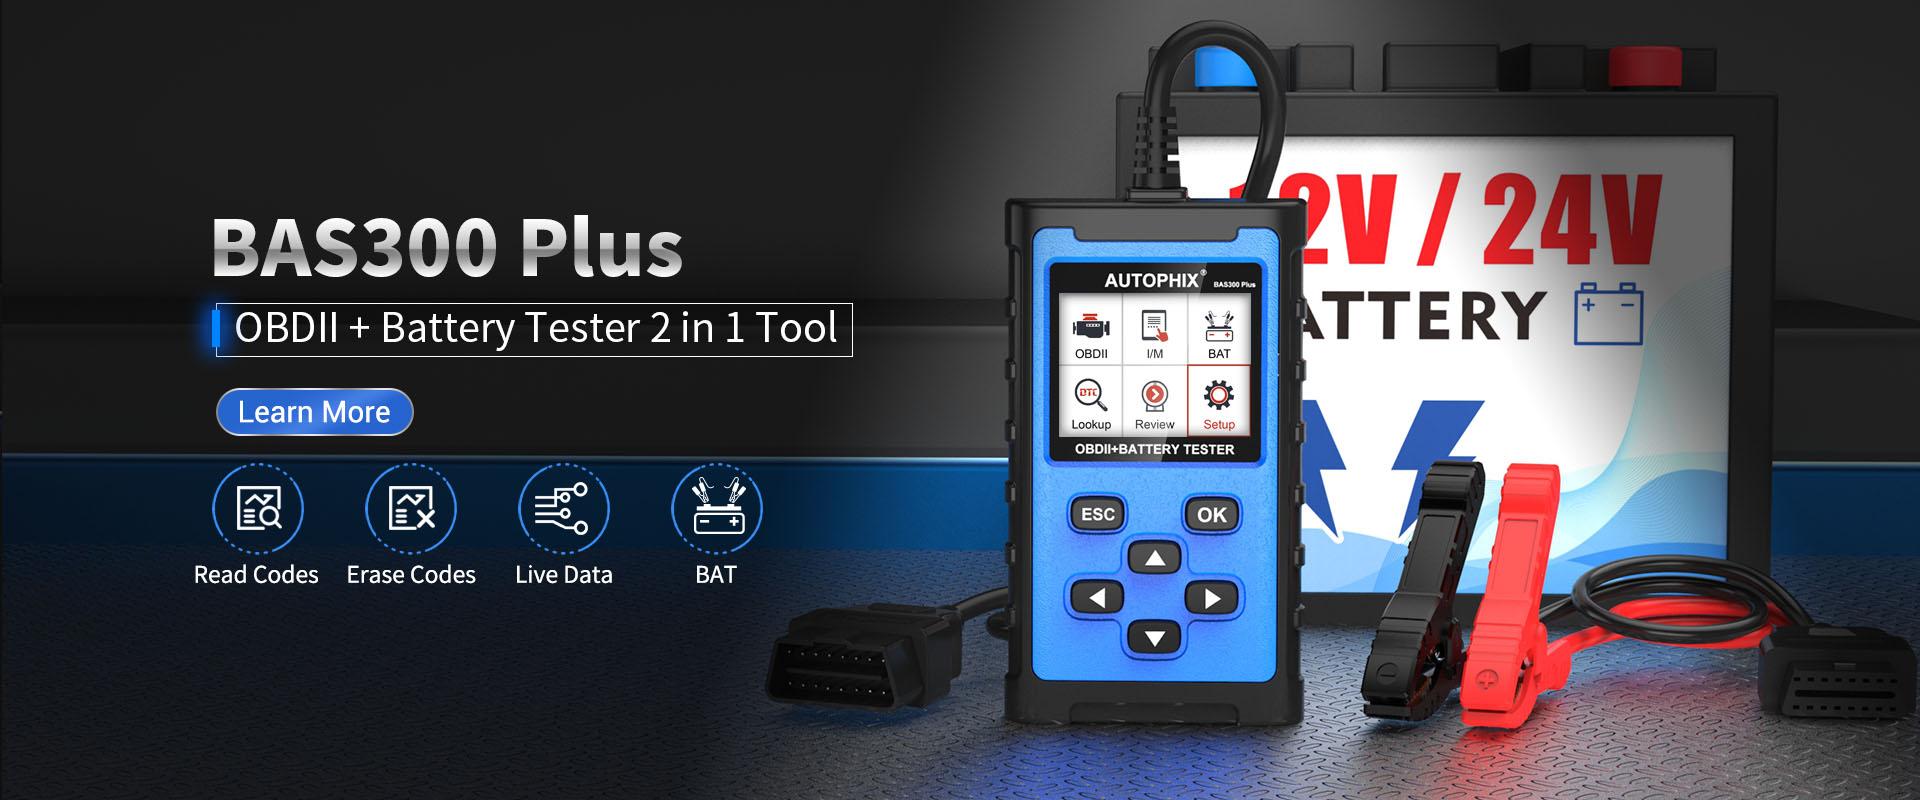 AUTOPHIX BAS300 PLUS-OBDII + Battery Tester 2 in 1 Tool